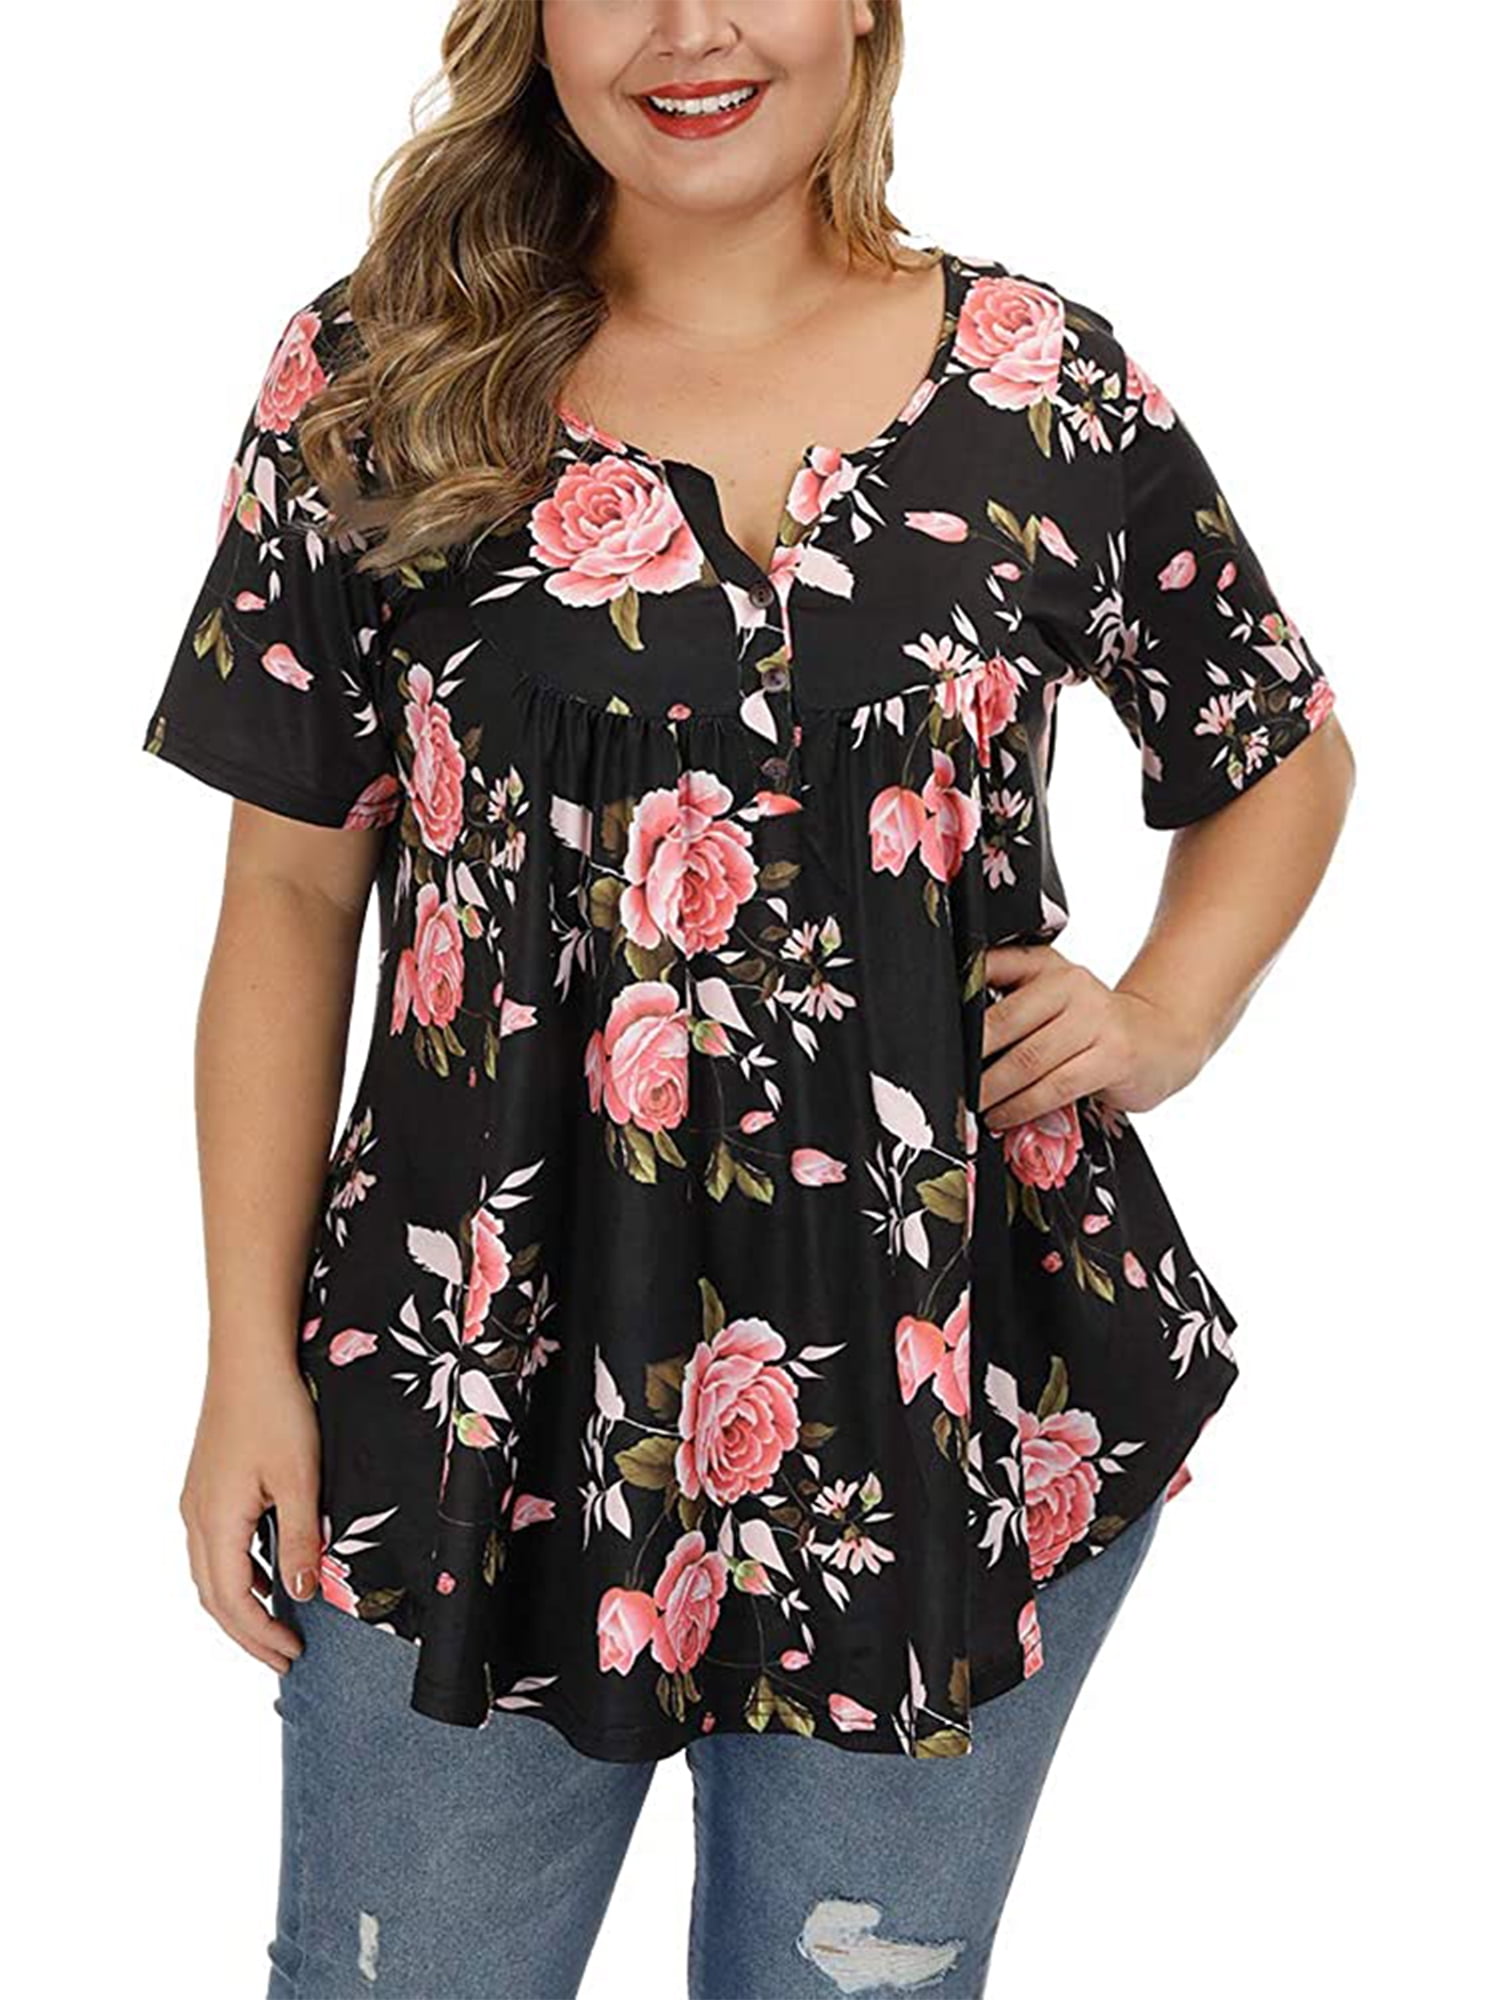 Chama Plus Size Henley Shirt for Women V Neck Button Up Floral Tunic ...